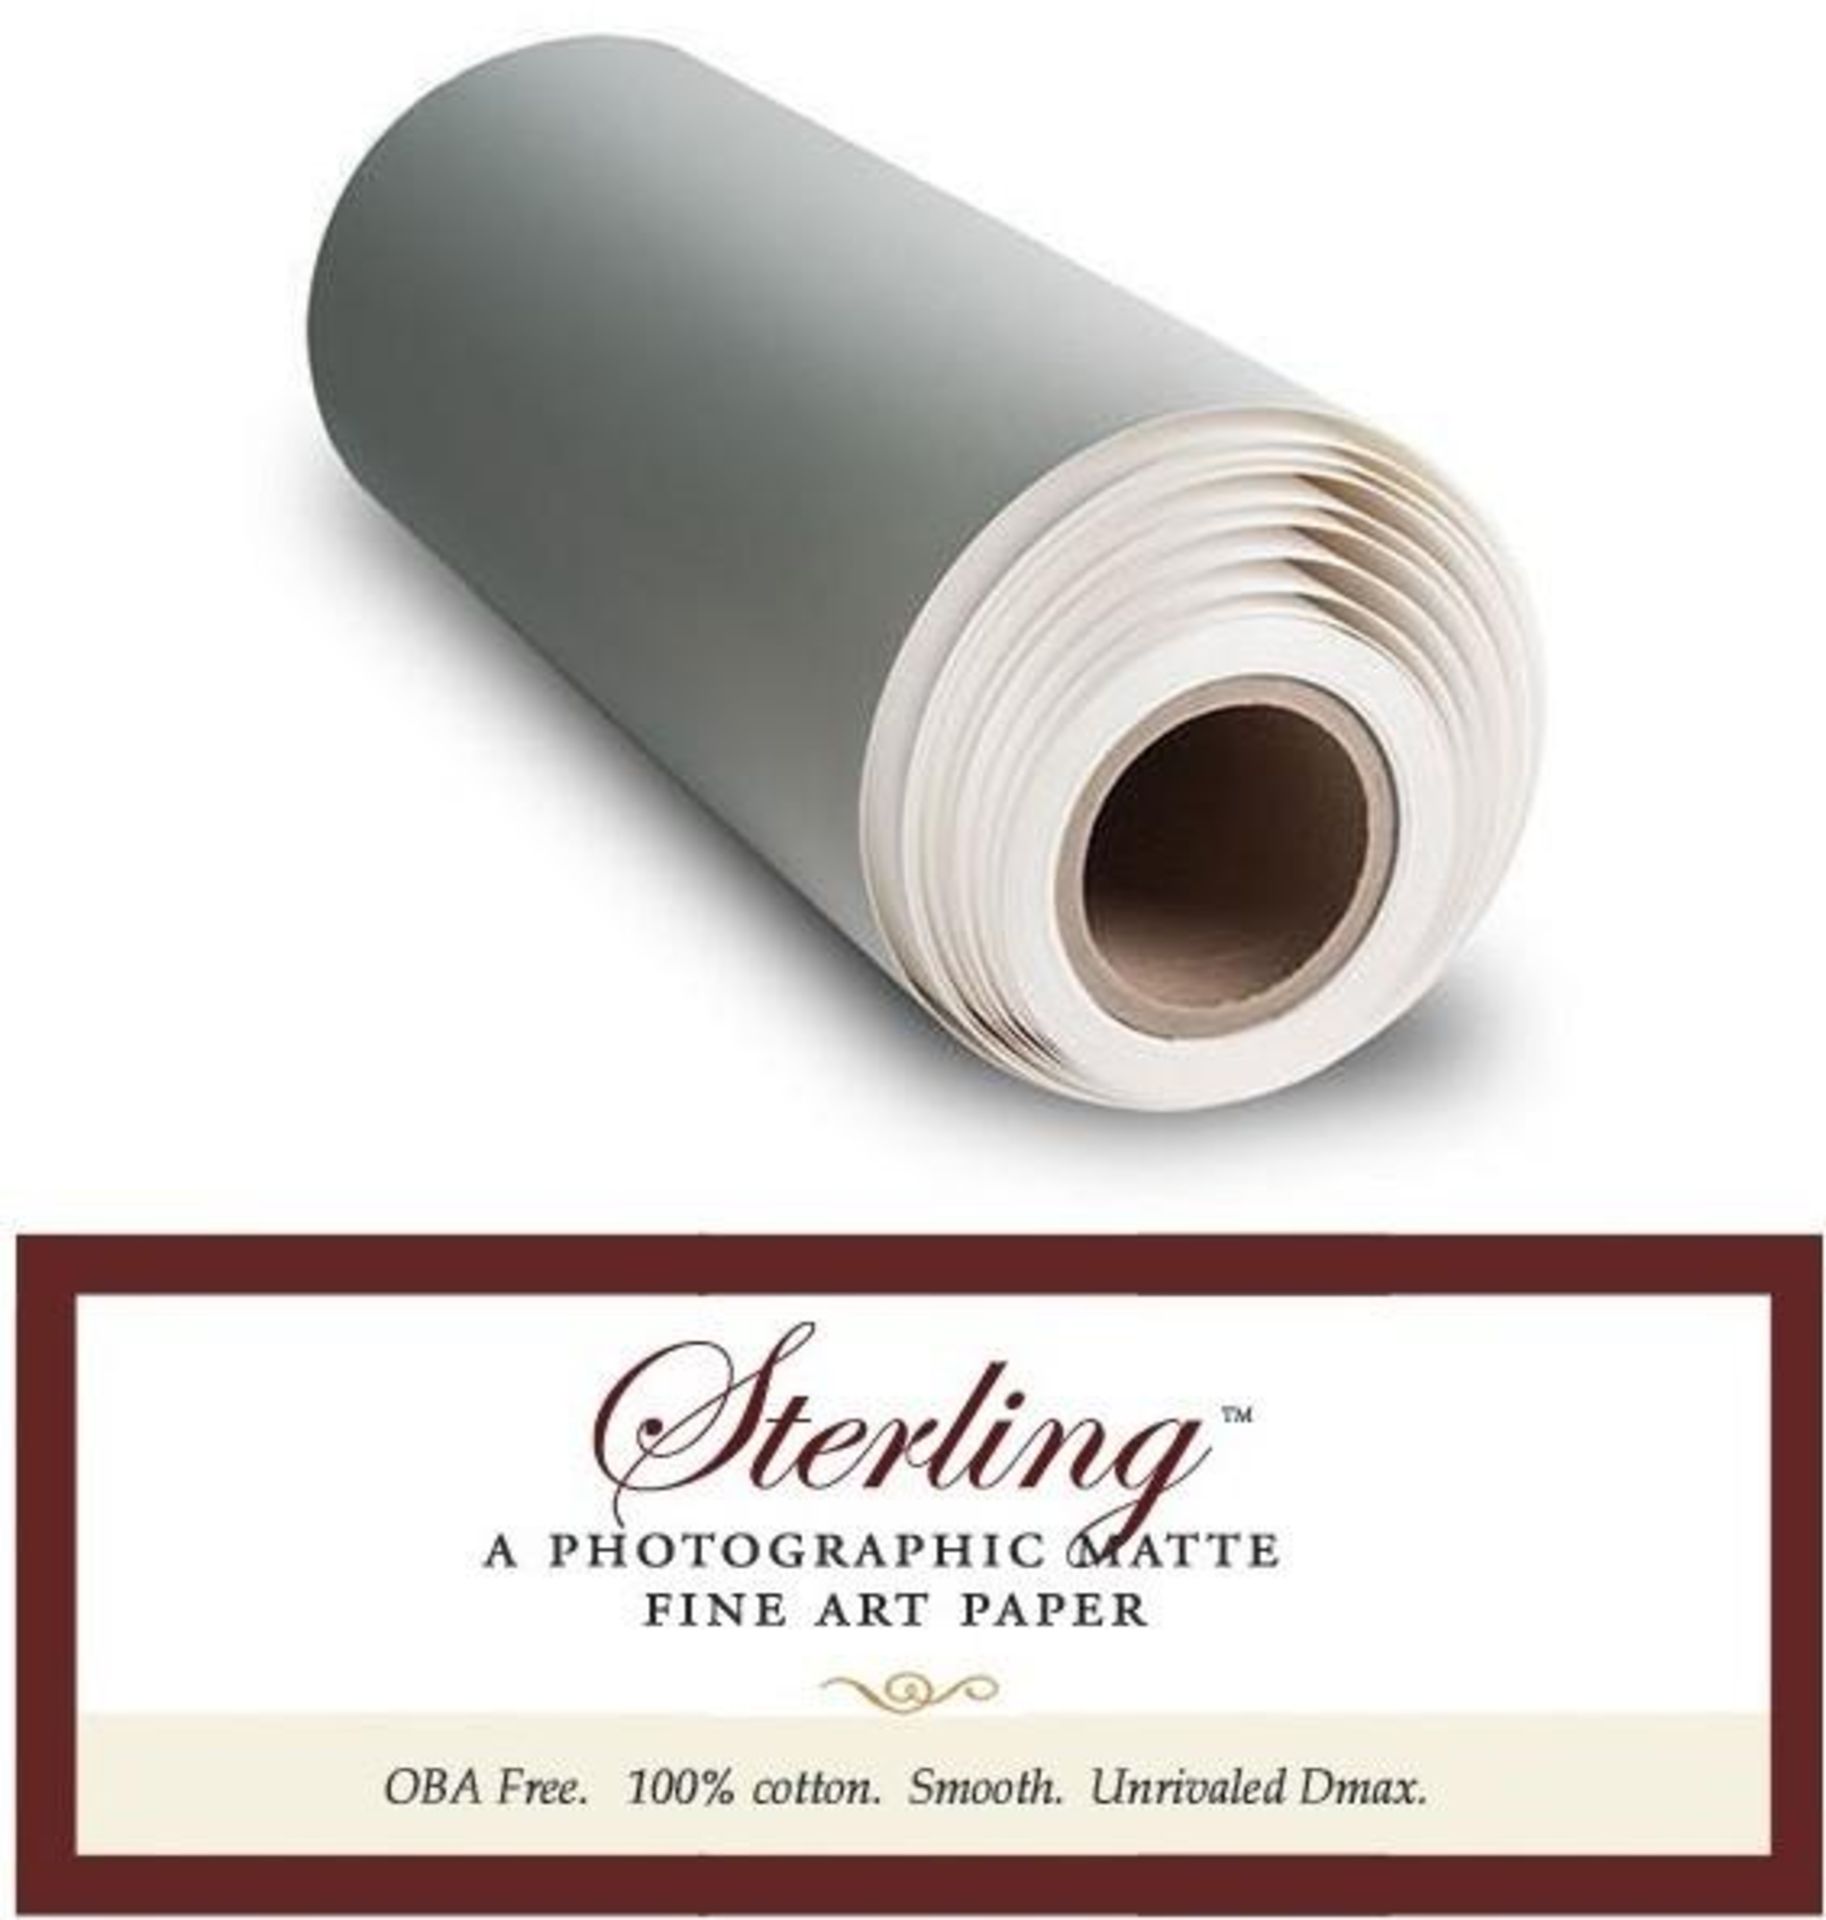 4 x Breathing Colour STERLING Photographic Matte Fine Art Paper - Size 24"" x 40' - OBA Free - 100%